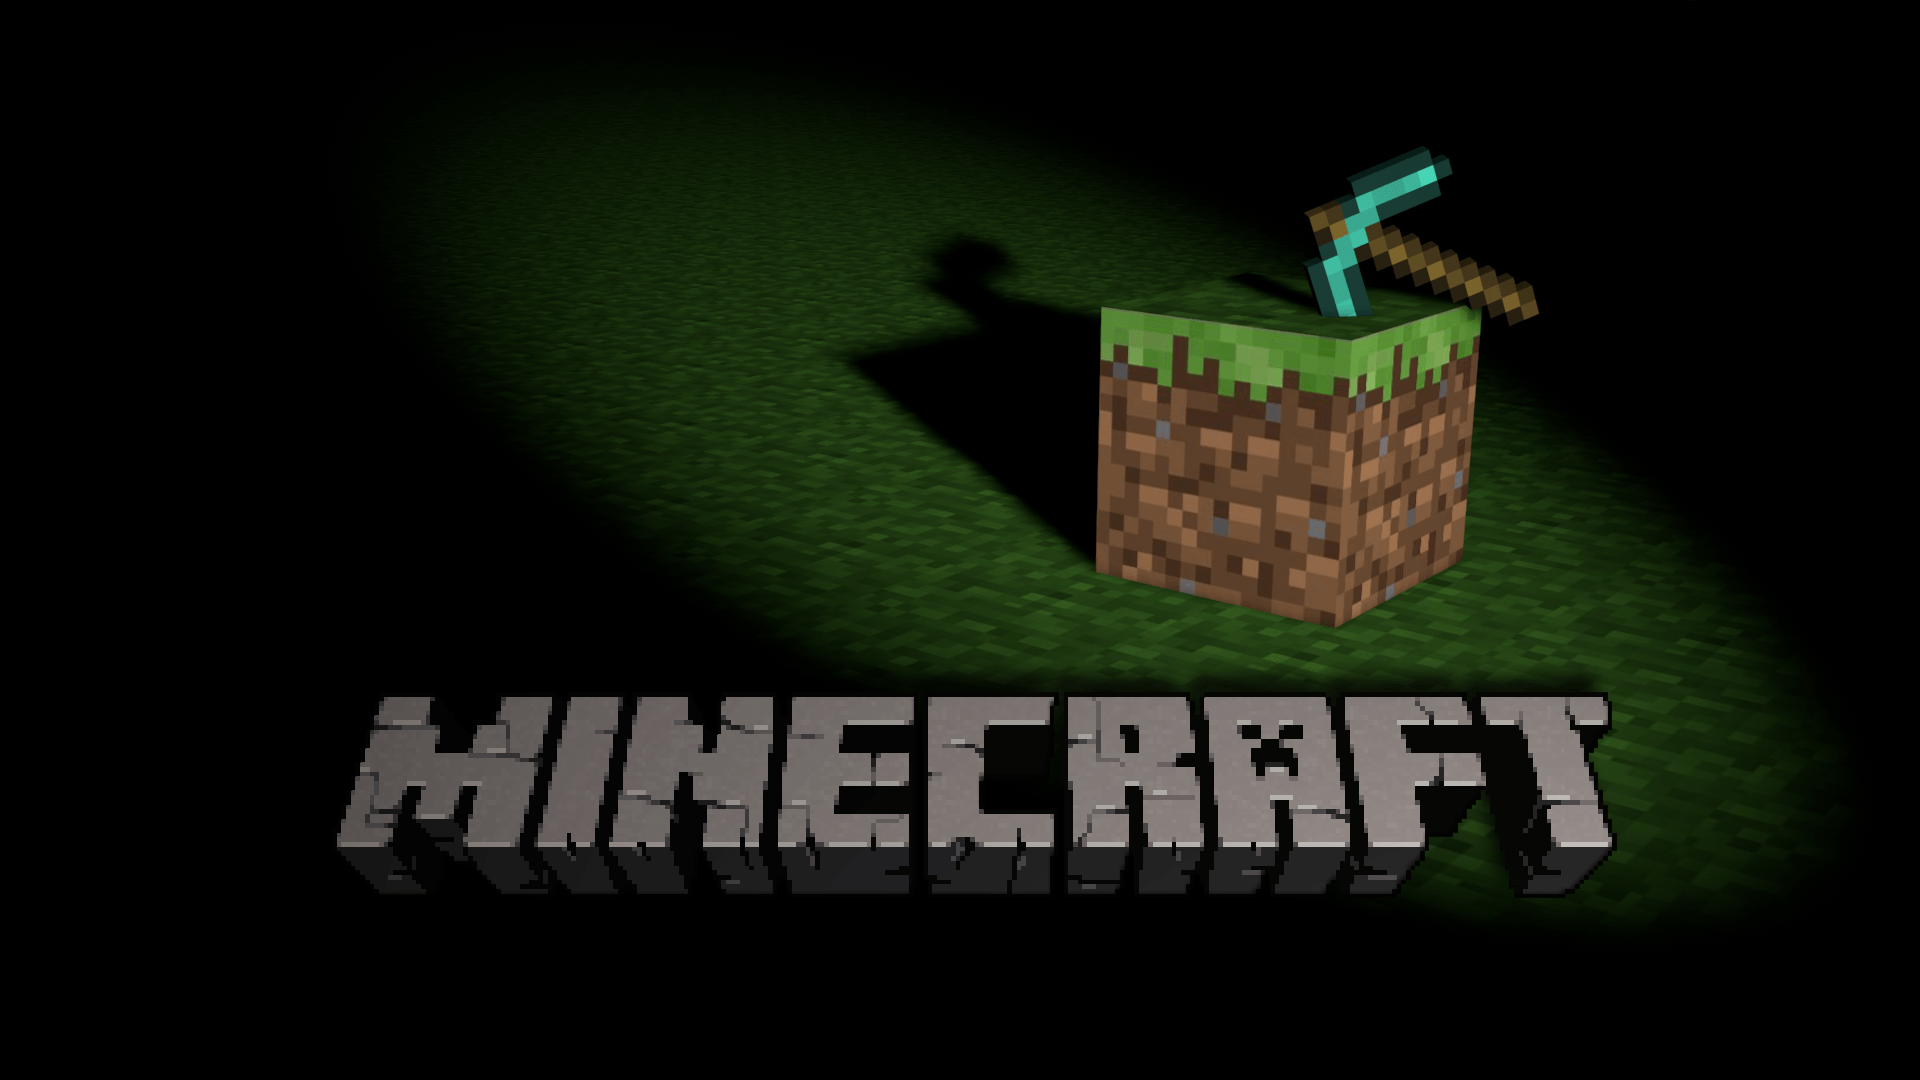 Cool Minecraft Background for Your Phone